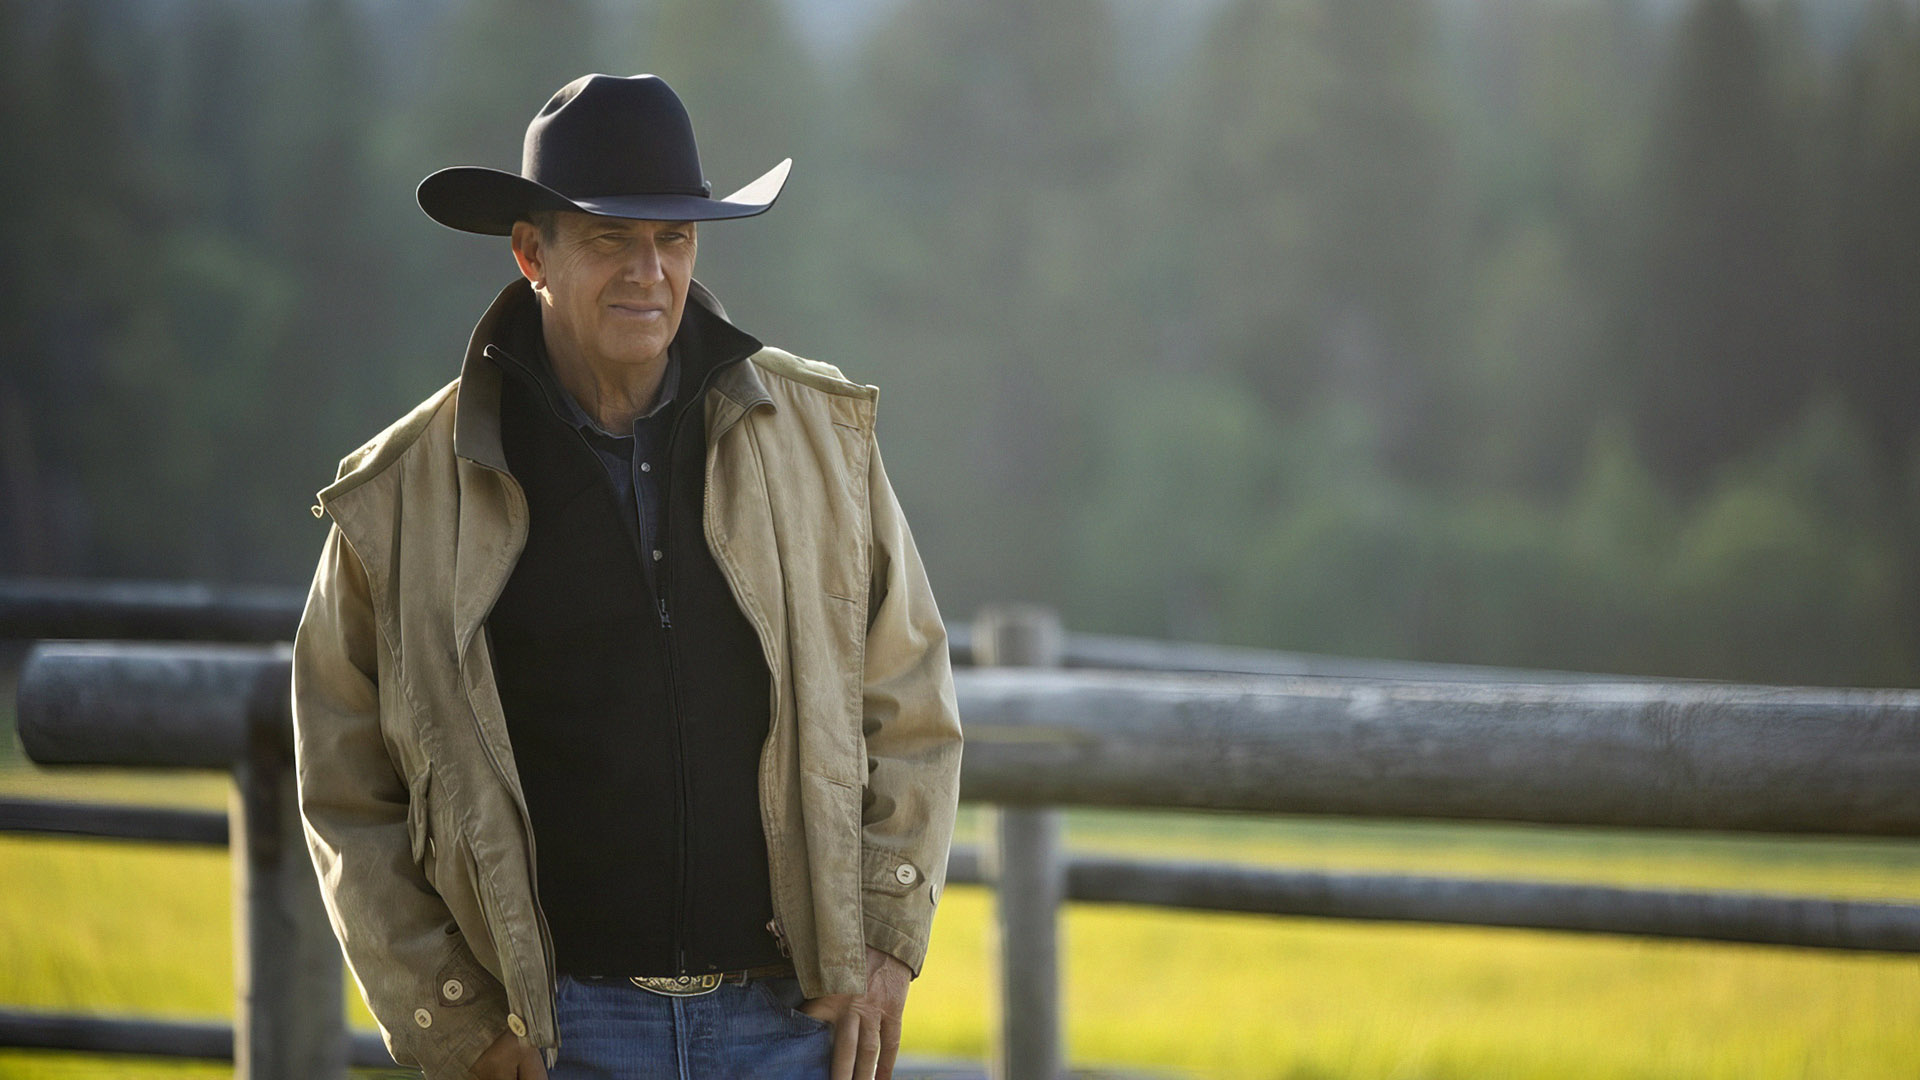 Yellowstone Series Finale: 5 Fan Predictions That Can Actually Come True